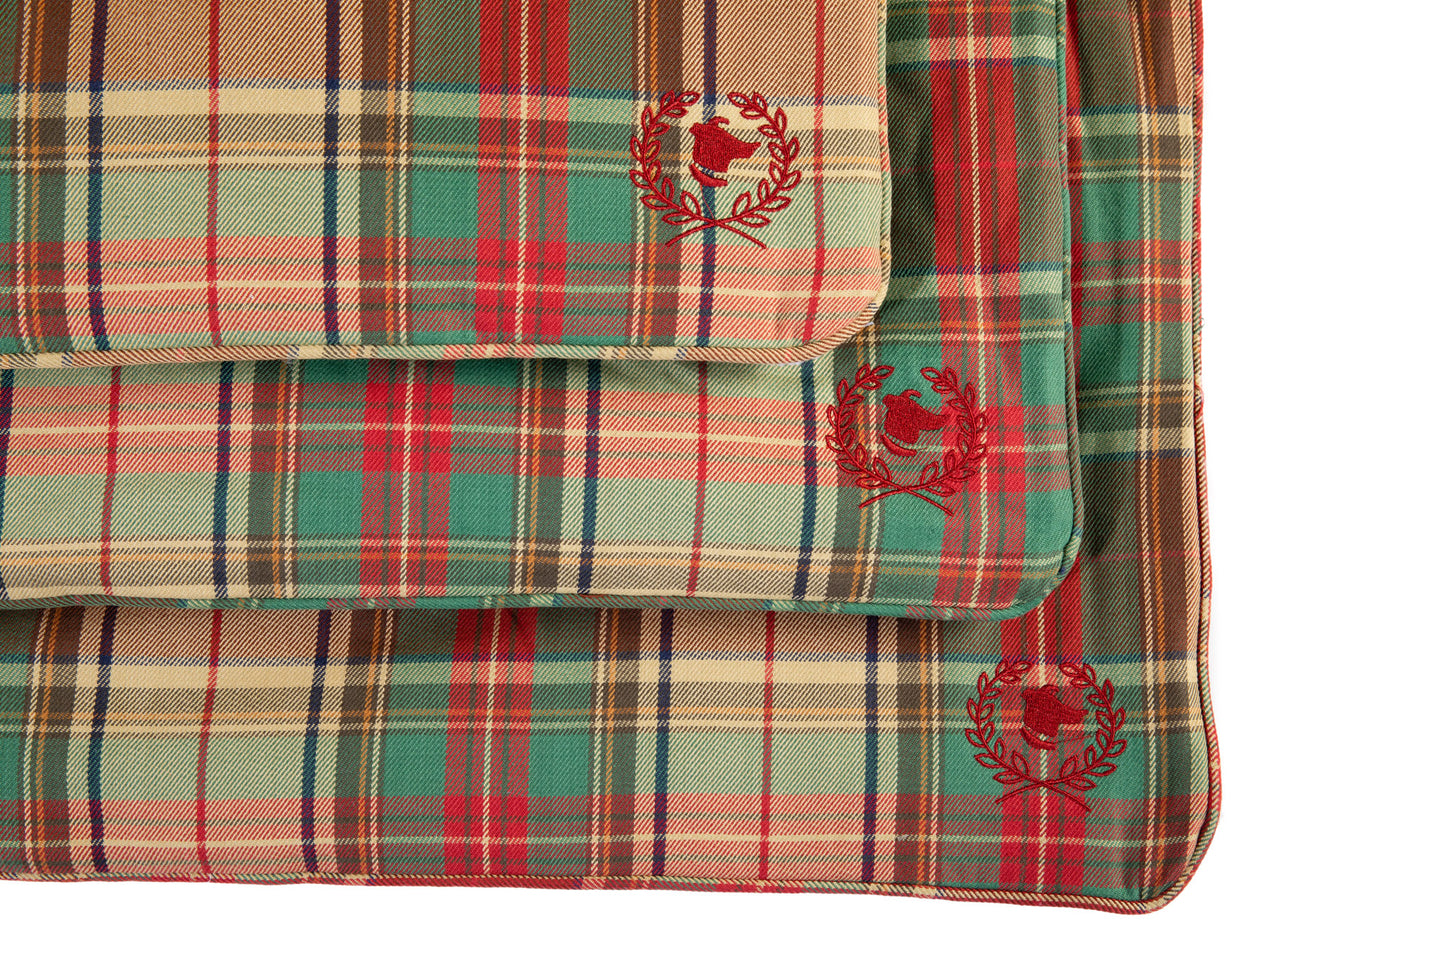 Canine Styles - Crate Mat - Ivy League Plaid